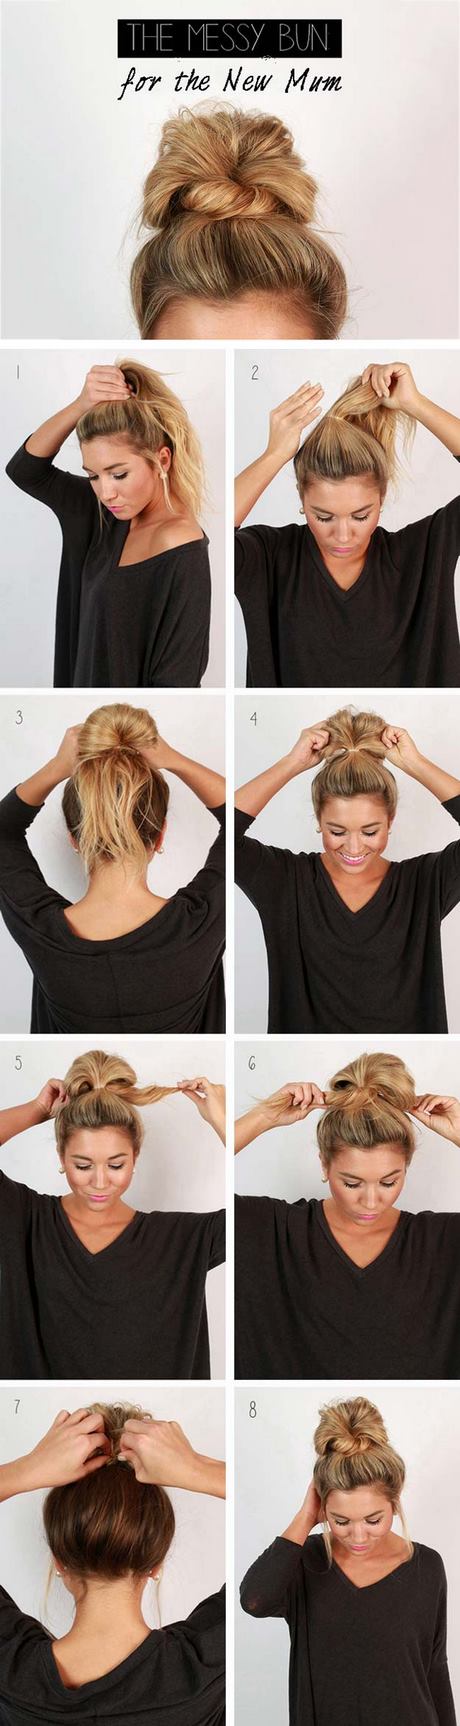 super-cute-and-easy-hairstyles-07_6 Super cute and easy hairstyles